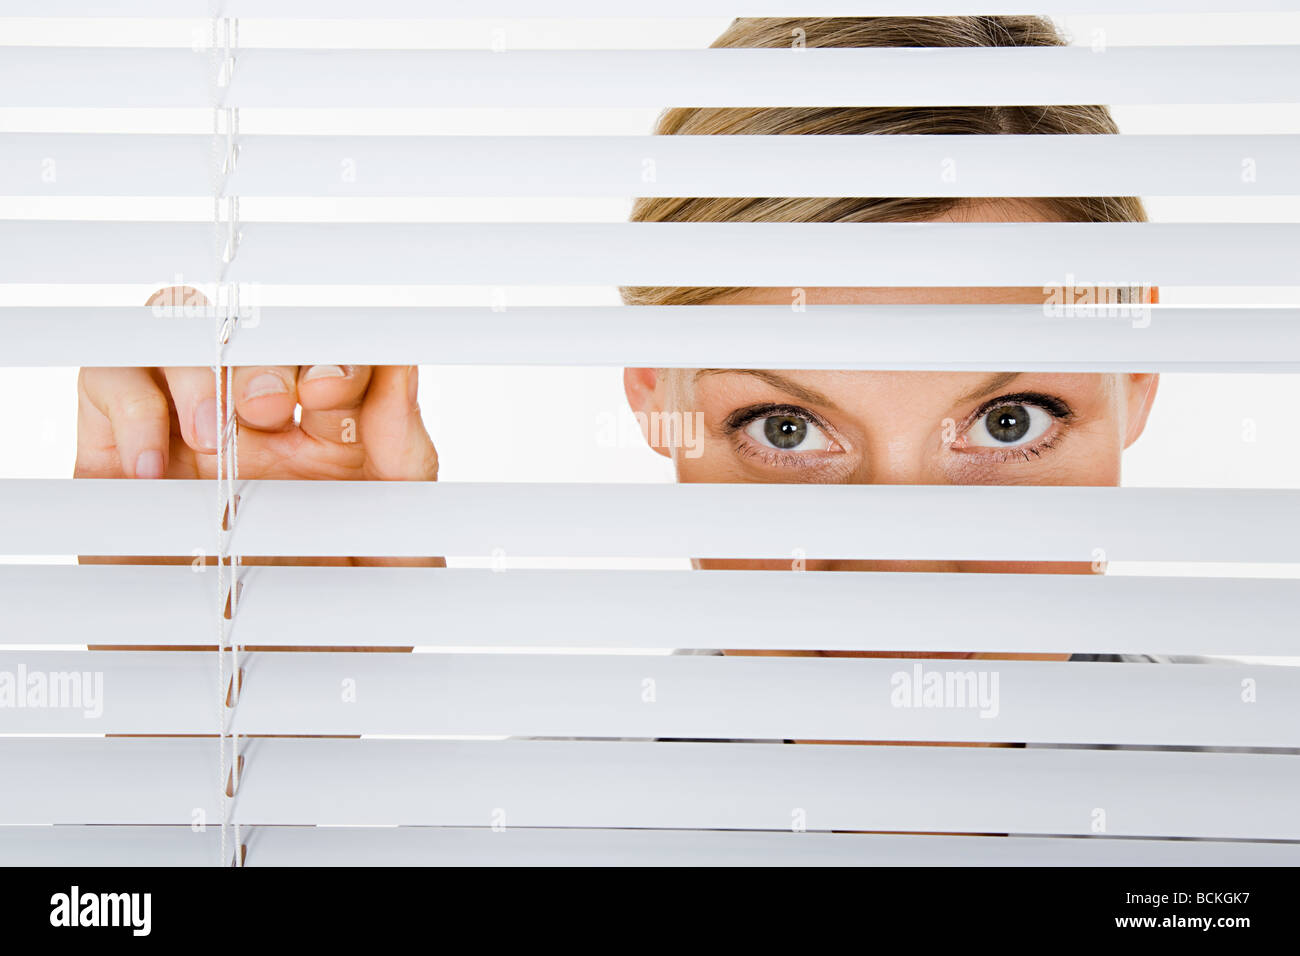 Woman looking through blinds Stock Photo